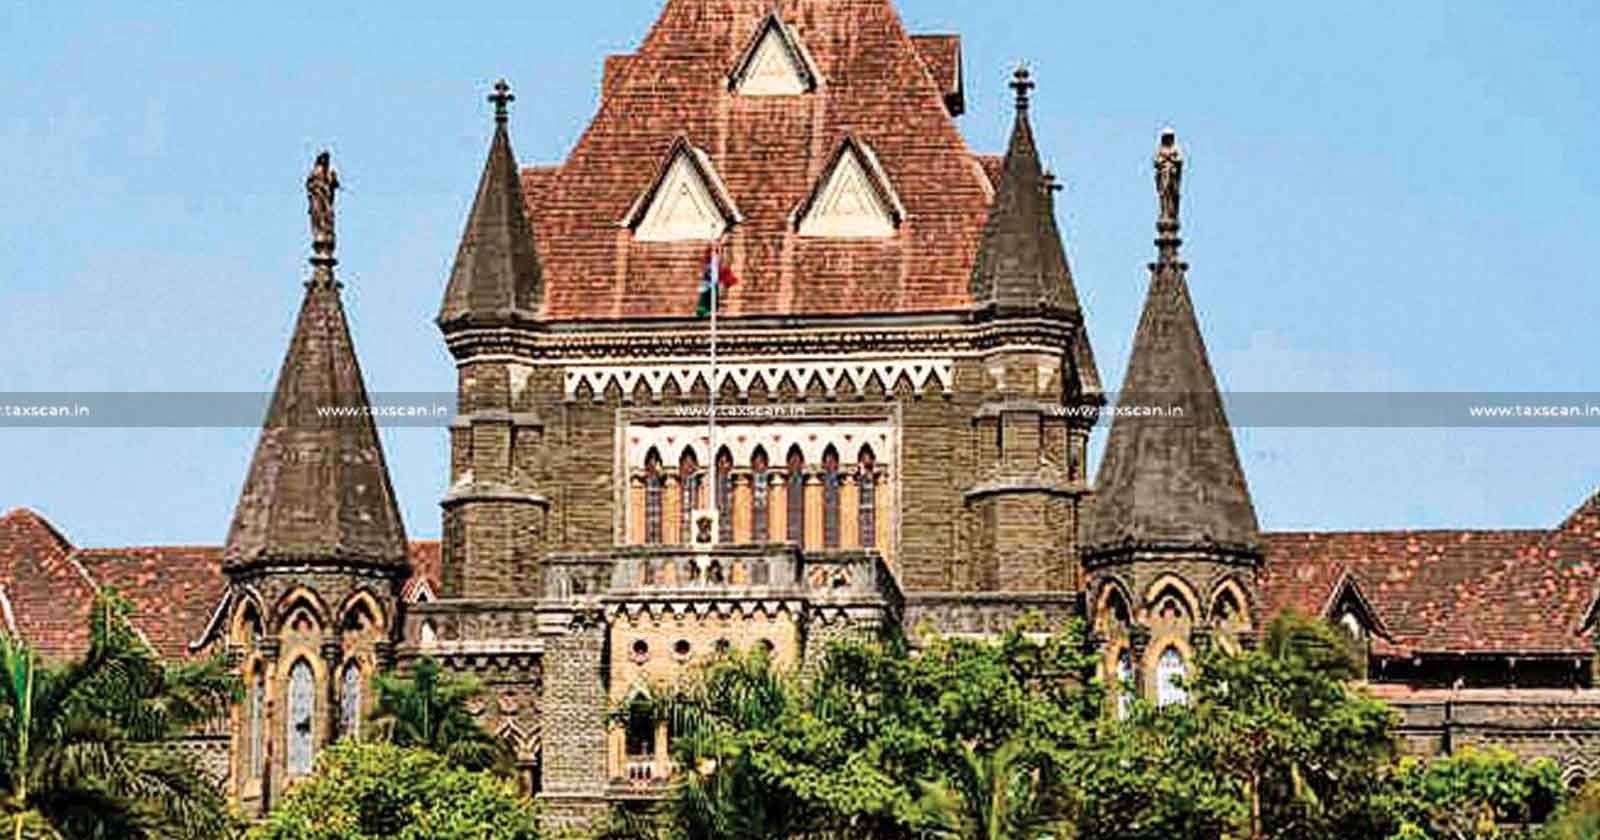 Bombay HC upholds Cancellation of Liquor License - Bombay High Court - Cancellation of Liquor License - Liquor License - Excise Commissioner - Legal Heirs - Deceased Partner - taxscan